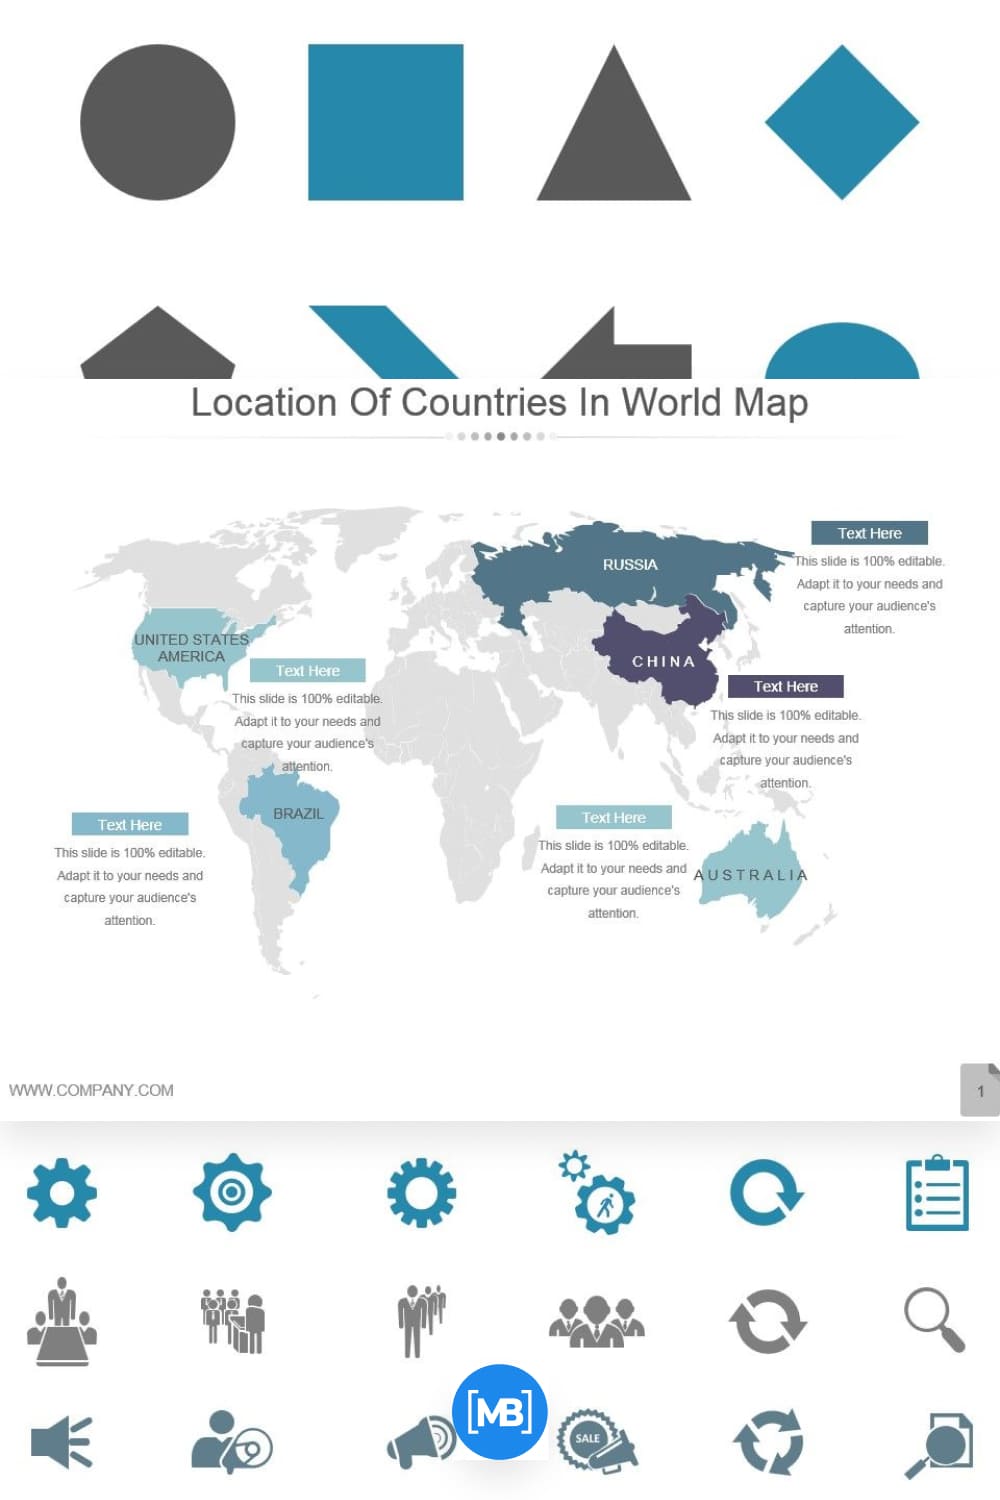 Location of countries in world map powerpoint template.